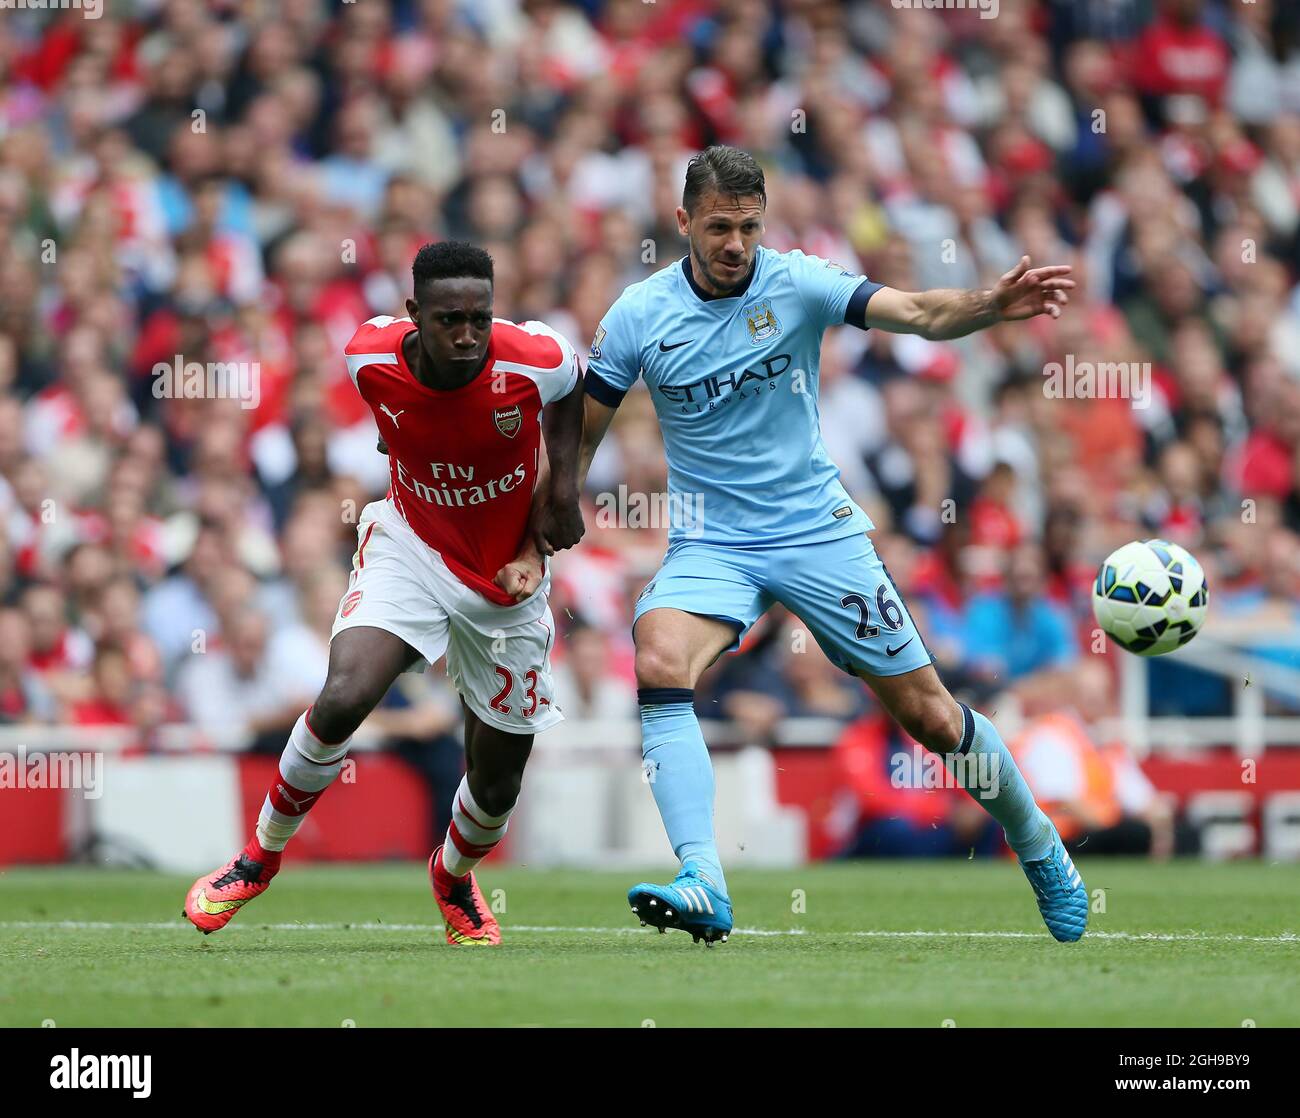 Arsenal's Danny Welbeck tussles with Manchester City's Martin Demichelis during the Barclays Premier League the match between Arsenal and Manchester City at Emirates Stadium on September 13, 2014. Stock Photo